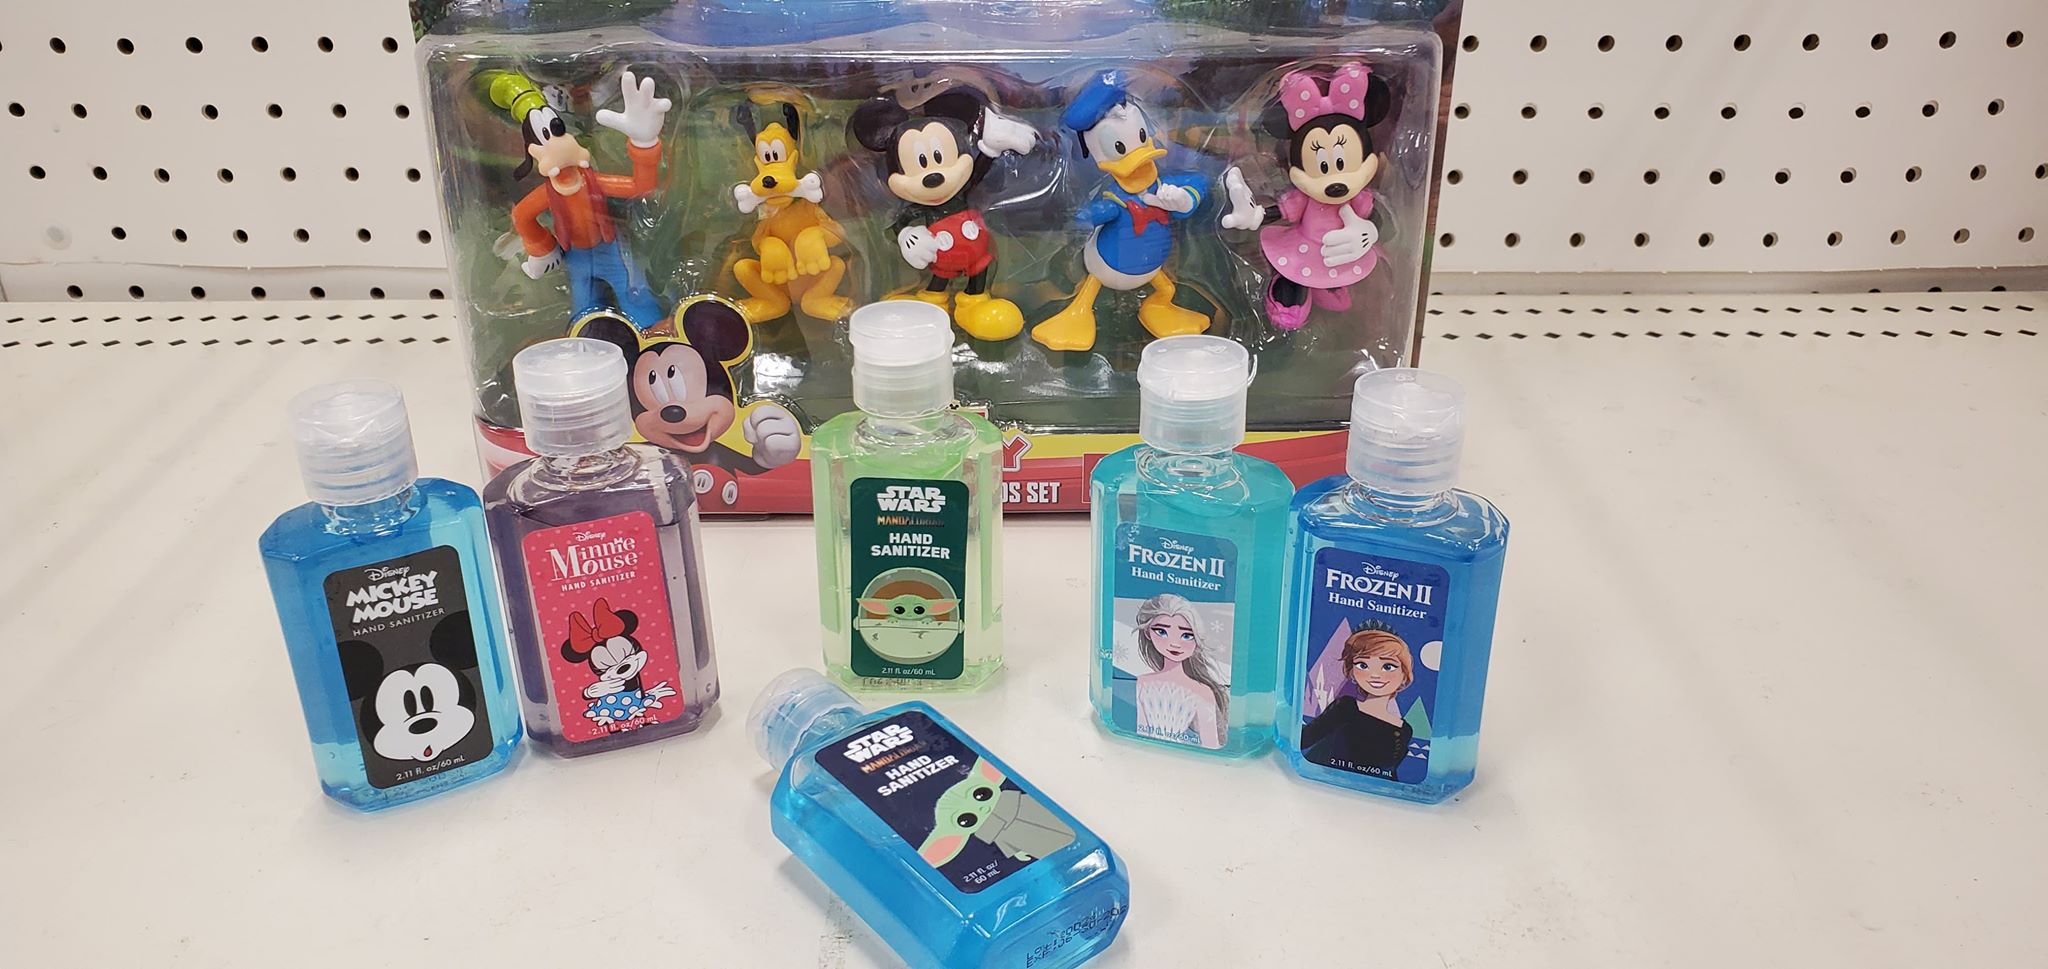 Disney Character Hand Sanitizers Now Available at Target!